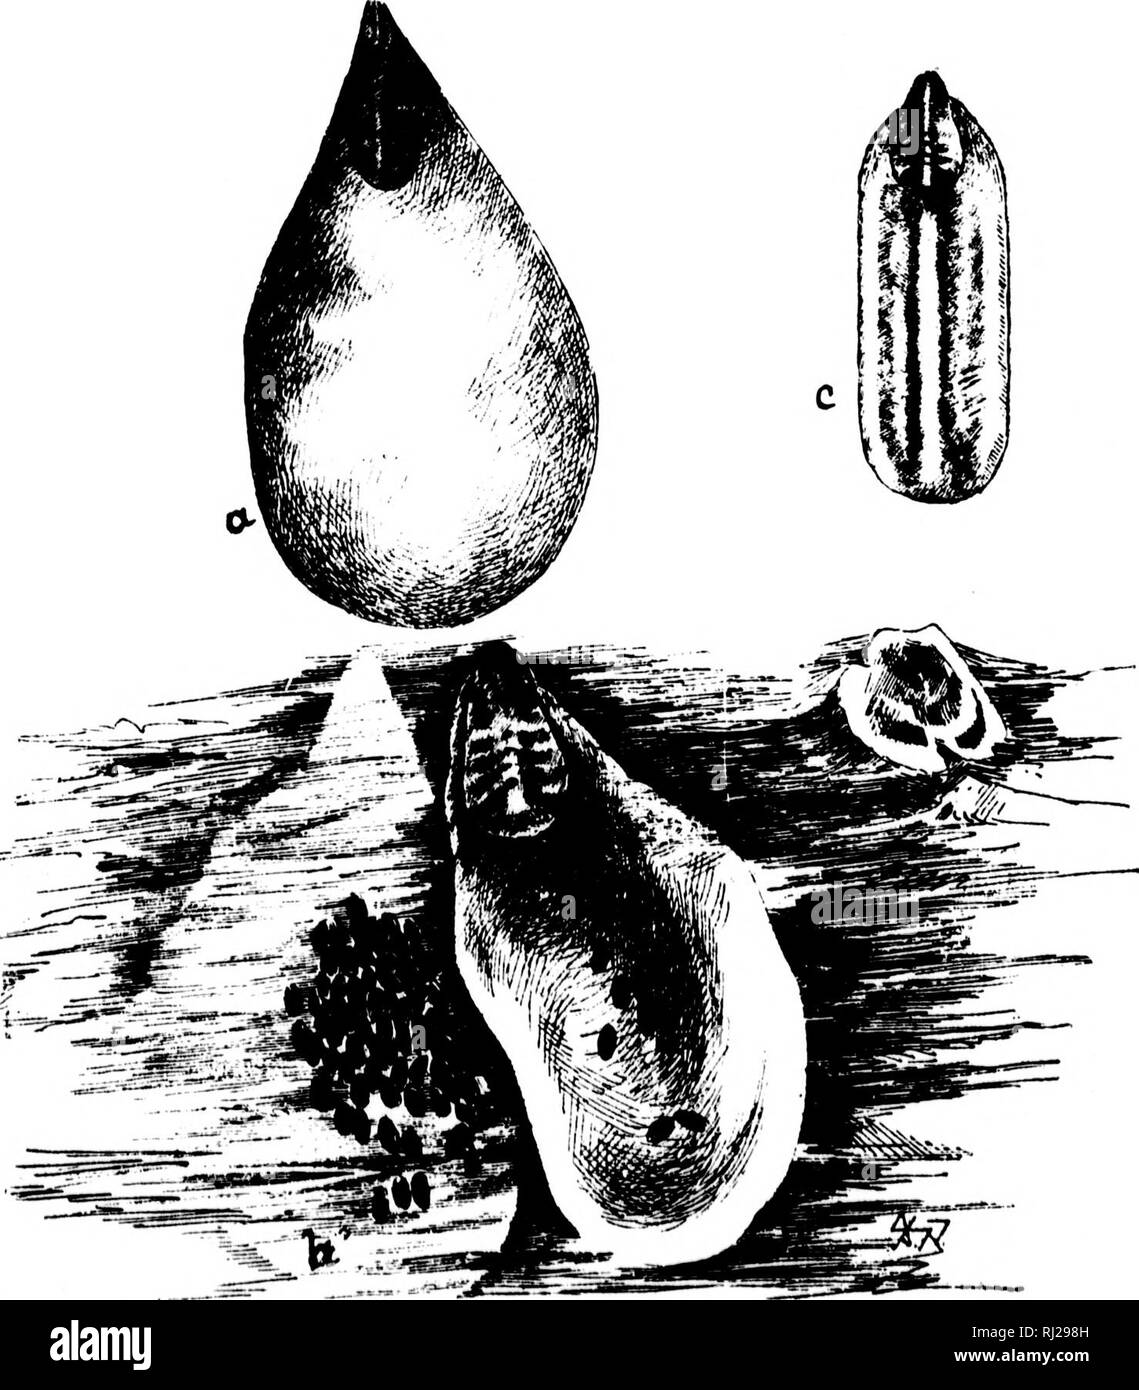 . The San José and other scale insects [microform] : prepared for the use of fruit growers and scale inspectors. Scale-insects; Fruit; Coccidés; Fruit. 42 7. The Scurfy Bark-Louse. {Chionaspis furfurus).. Fig. 10—Scurfy Borkli use (Chidnafpis furfurus). (a) Adult female scale, upper surface, show- ioR the two mrulted xkitis at anteiior end, and enlarged posteiior end of the white scale, ih) AduU female, under surface, showing the insect at anterior end, and the numerous purplish eggH. (c) Adult male, ohowing the one moulted skin, and the parallel sides and the three ribs. (Original.) The Scurf Stock Photo